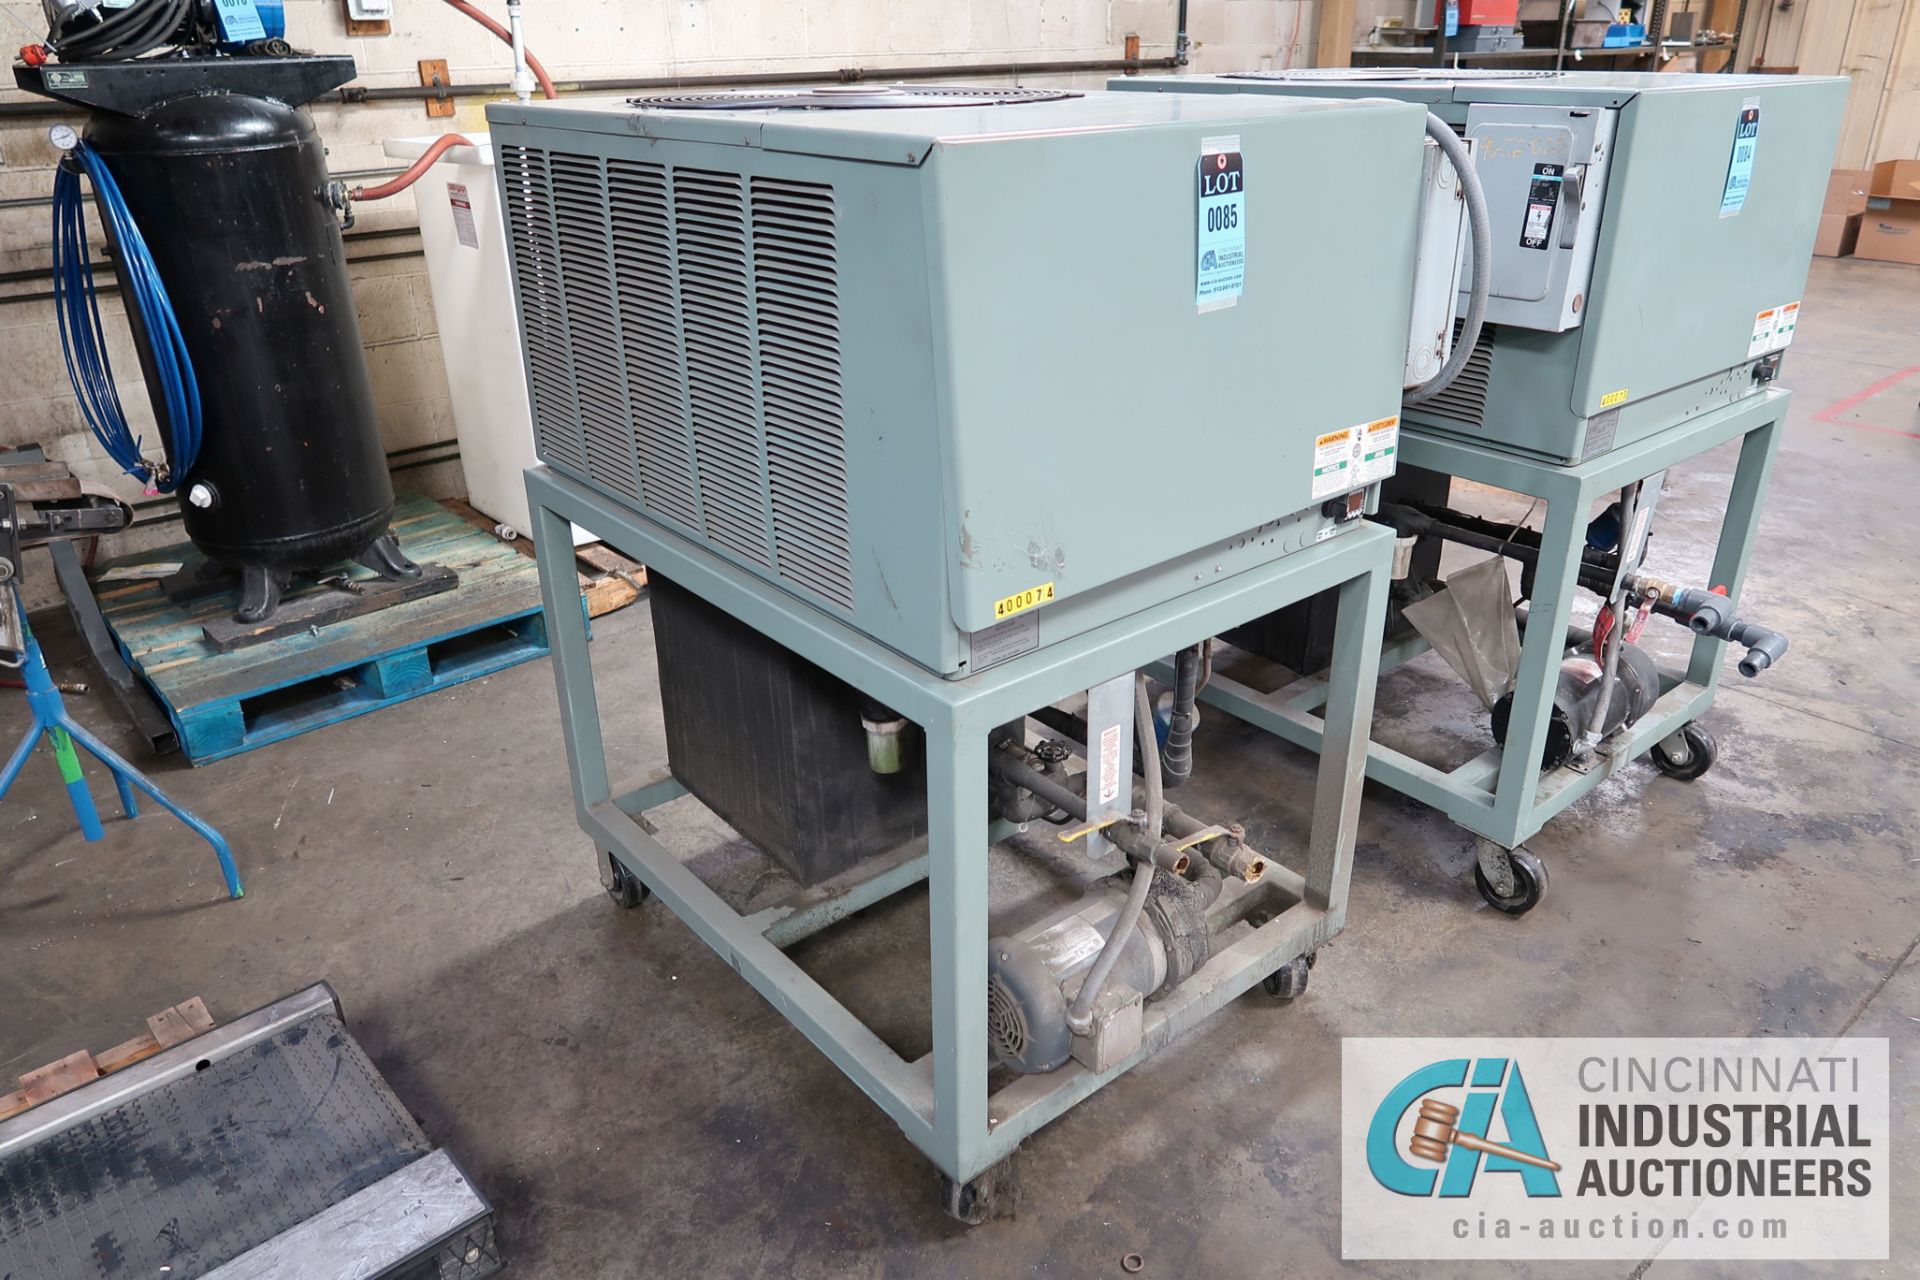 COLD SHOT CHILLER MODEL ACEC-60-E PORTABLE CHILLER; S/N MO22608-1, 1 HP PUMP, R-22 FREON, 460/3